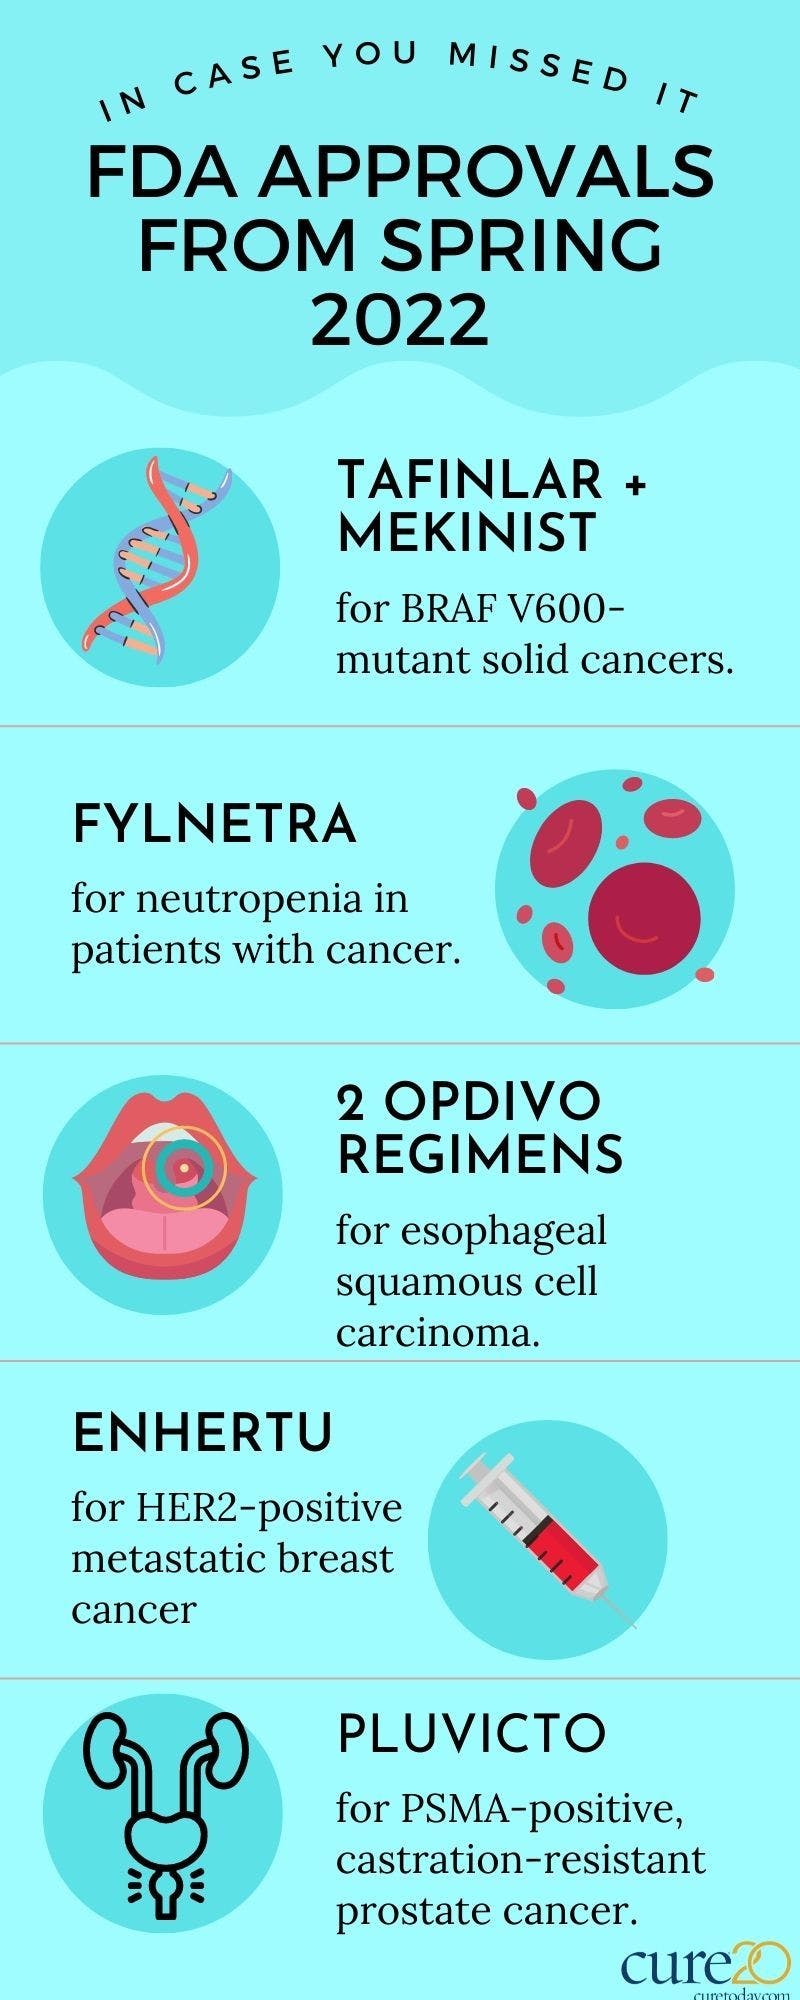 Here, CURE® provides a rundown of the newer cancer therapies that the FDA approved this spring.